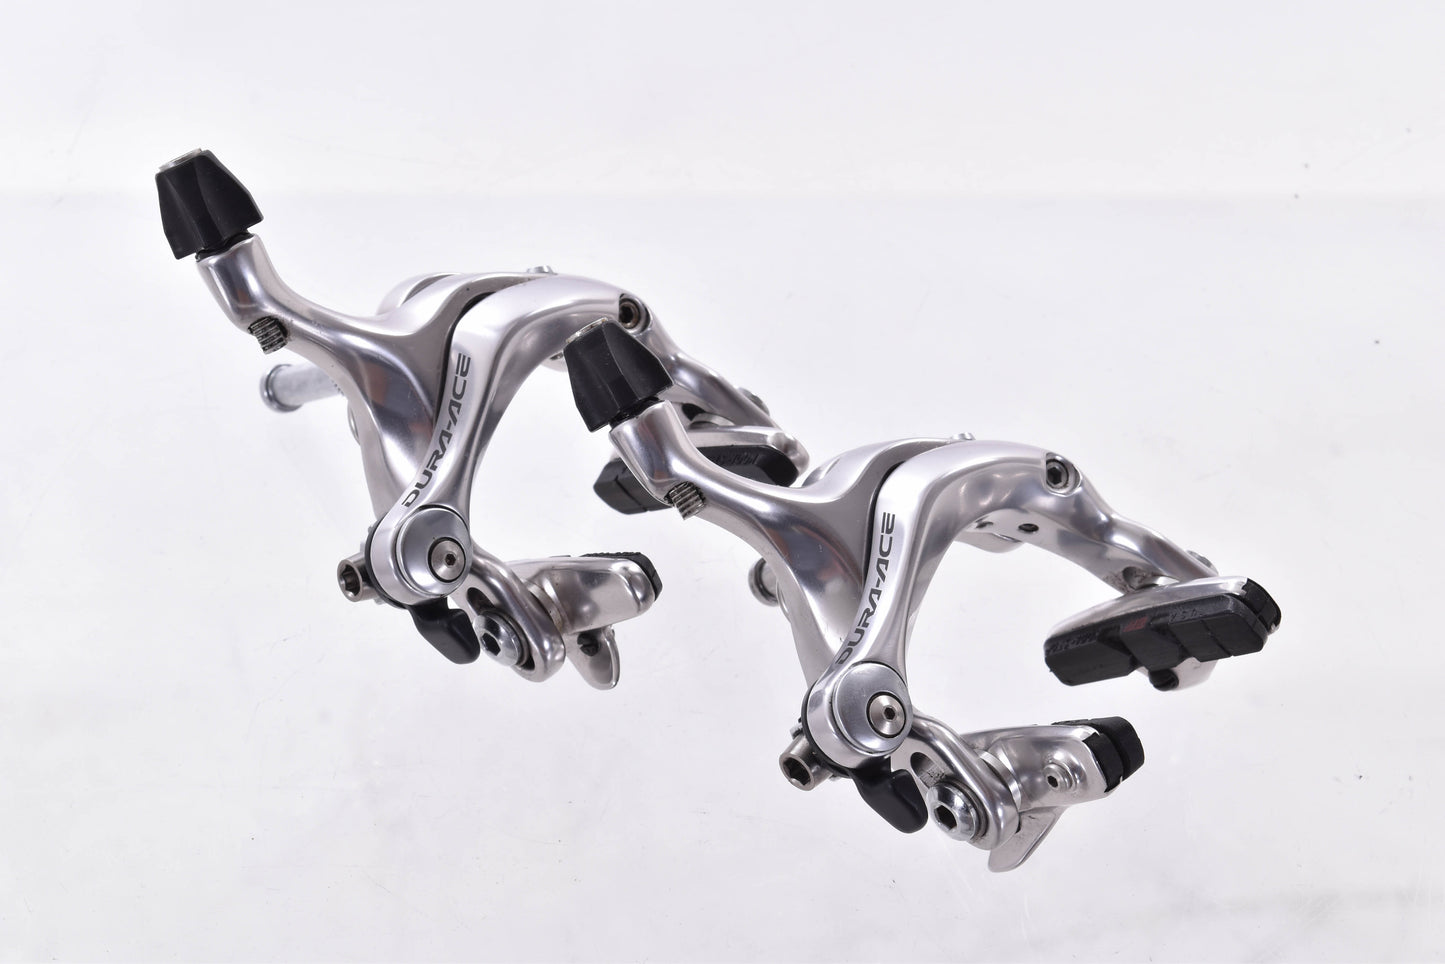 USED Shimano Dura-Ace 7800 2x10 speed TT Groupset Bar End Shifters, Brake Calipers Derailleurs Cassette